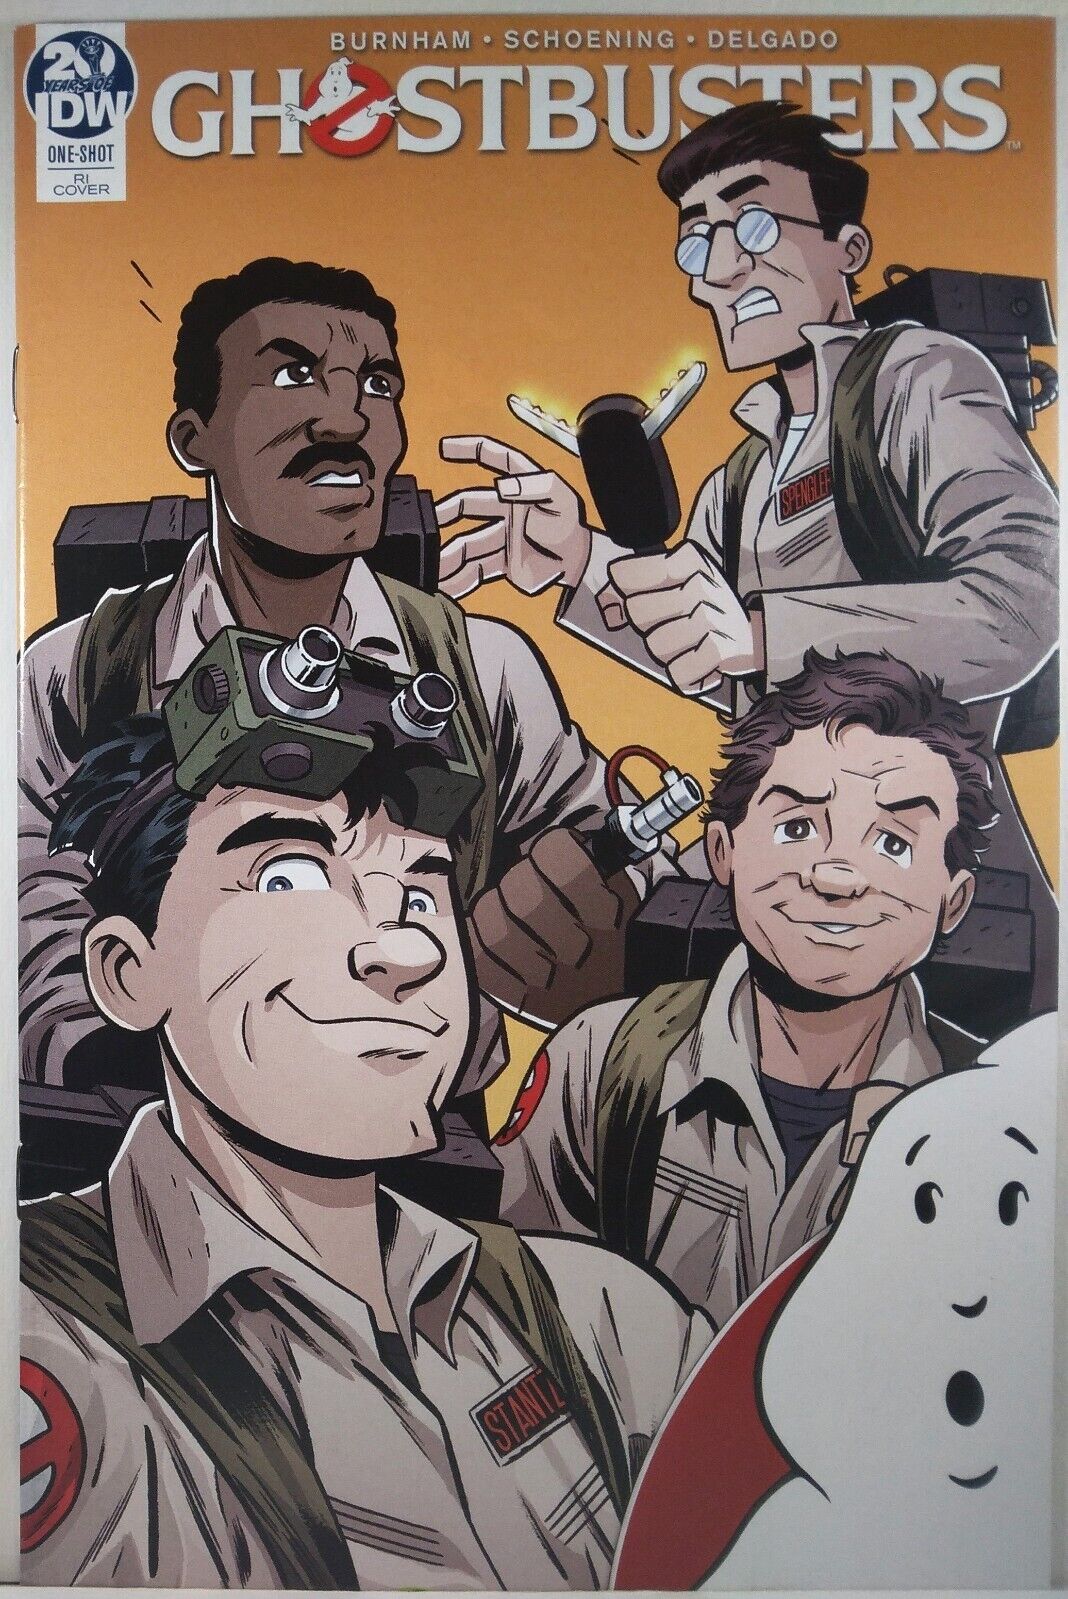 💥👻 GHOSTBUSTERS 35TH ANNIVERSARY MOVIE #1 RI ANTHONY MARQUES 1:10 VARIANT IDW